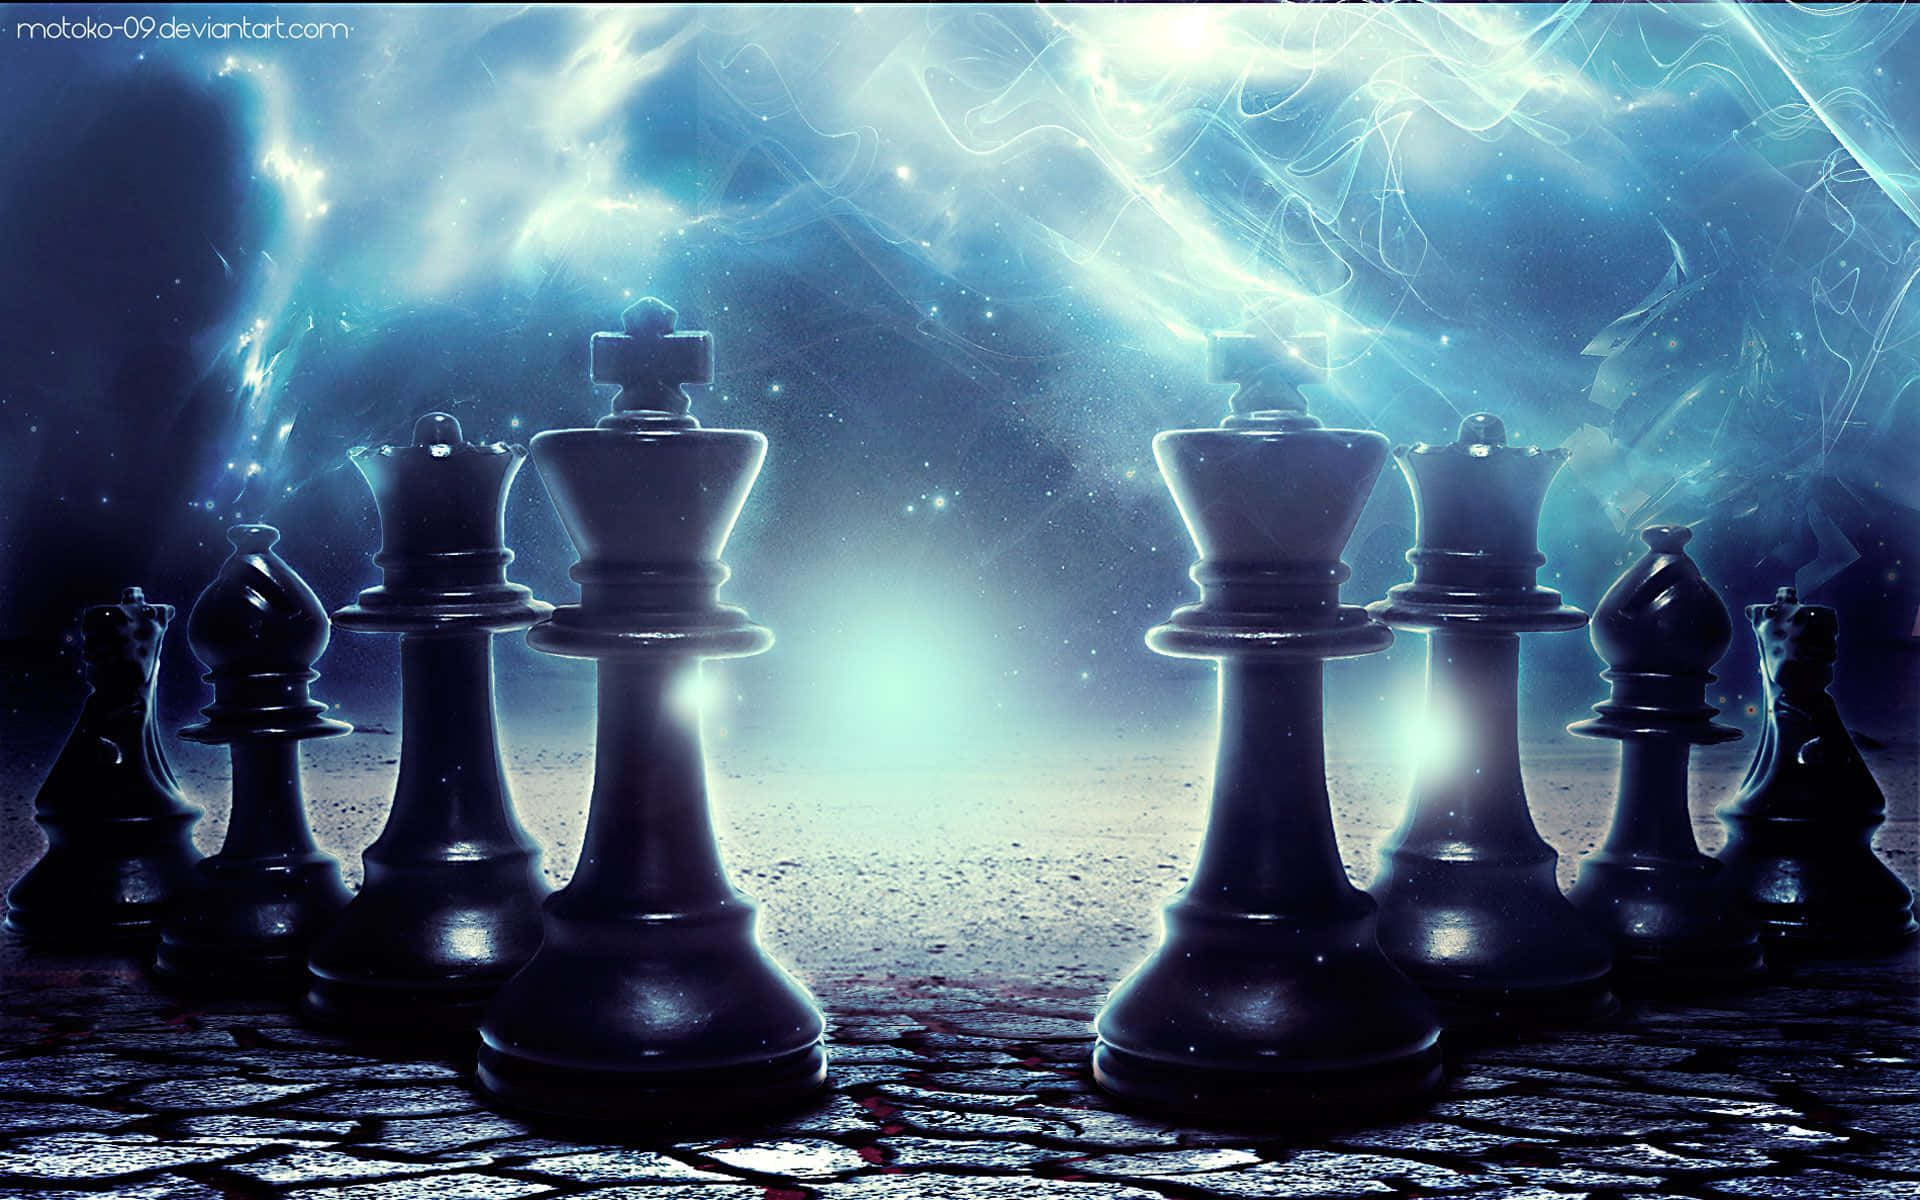 Wooden Chess Set In A Dark Room Background, Cool Chess Picture, Game, Chess  Background Image And Wallpaper for Free Download